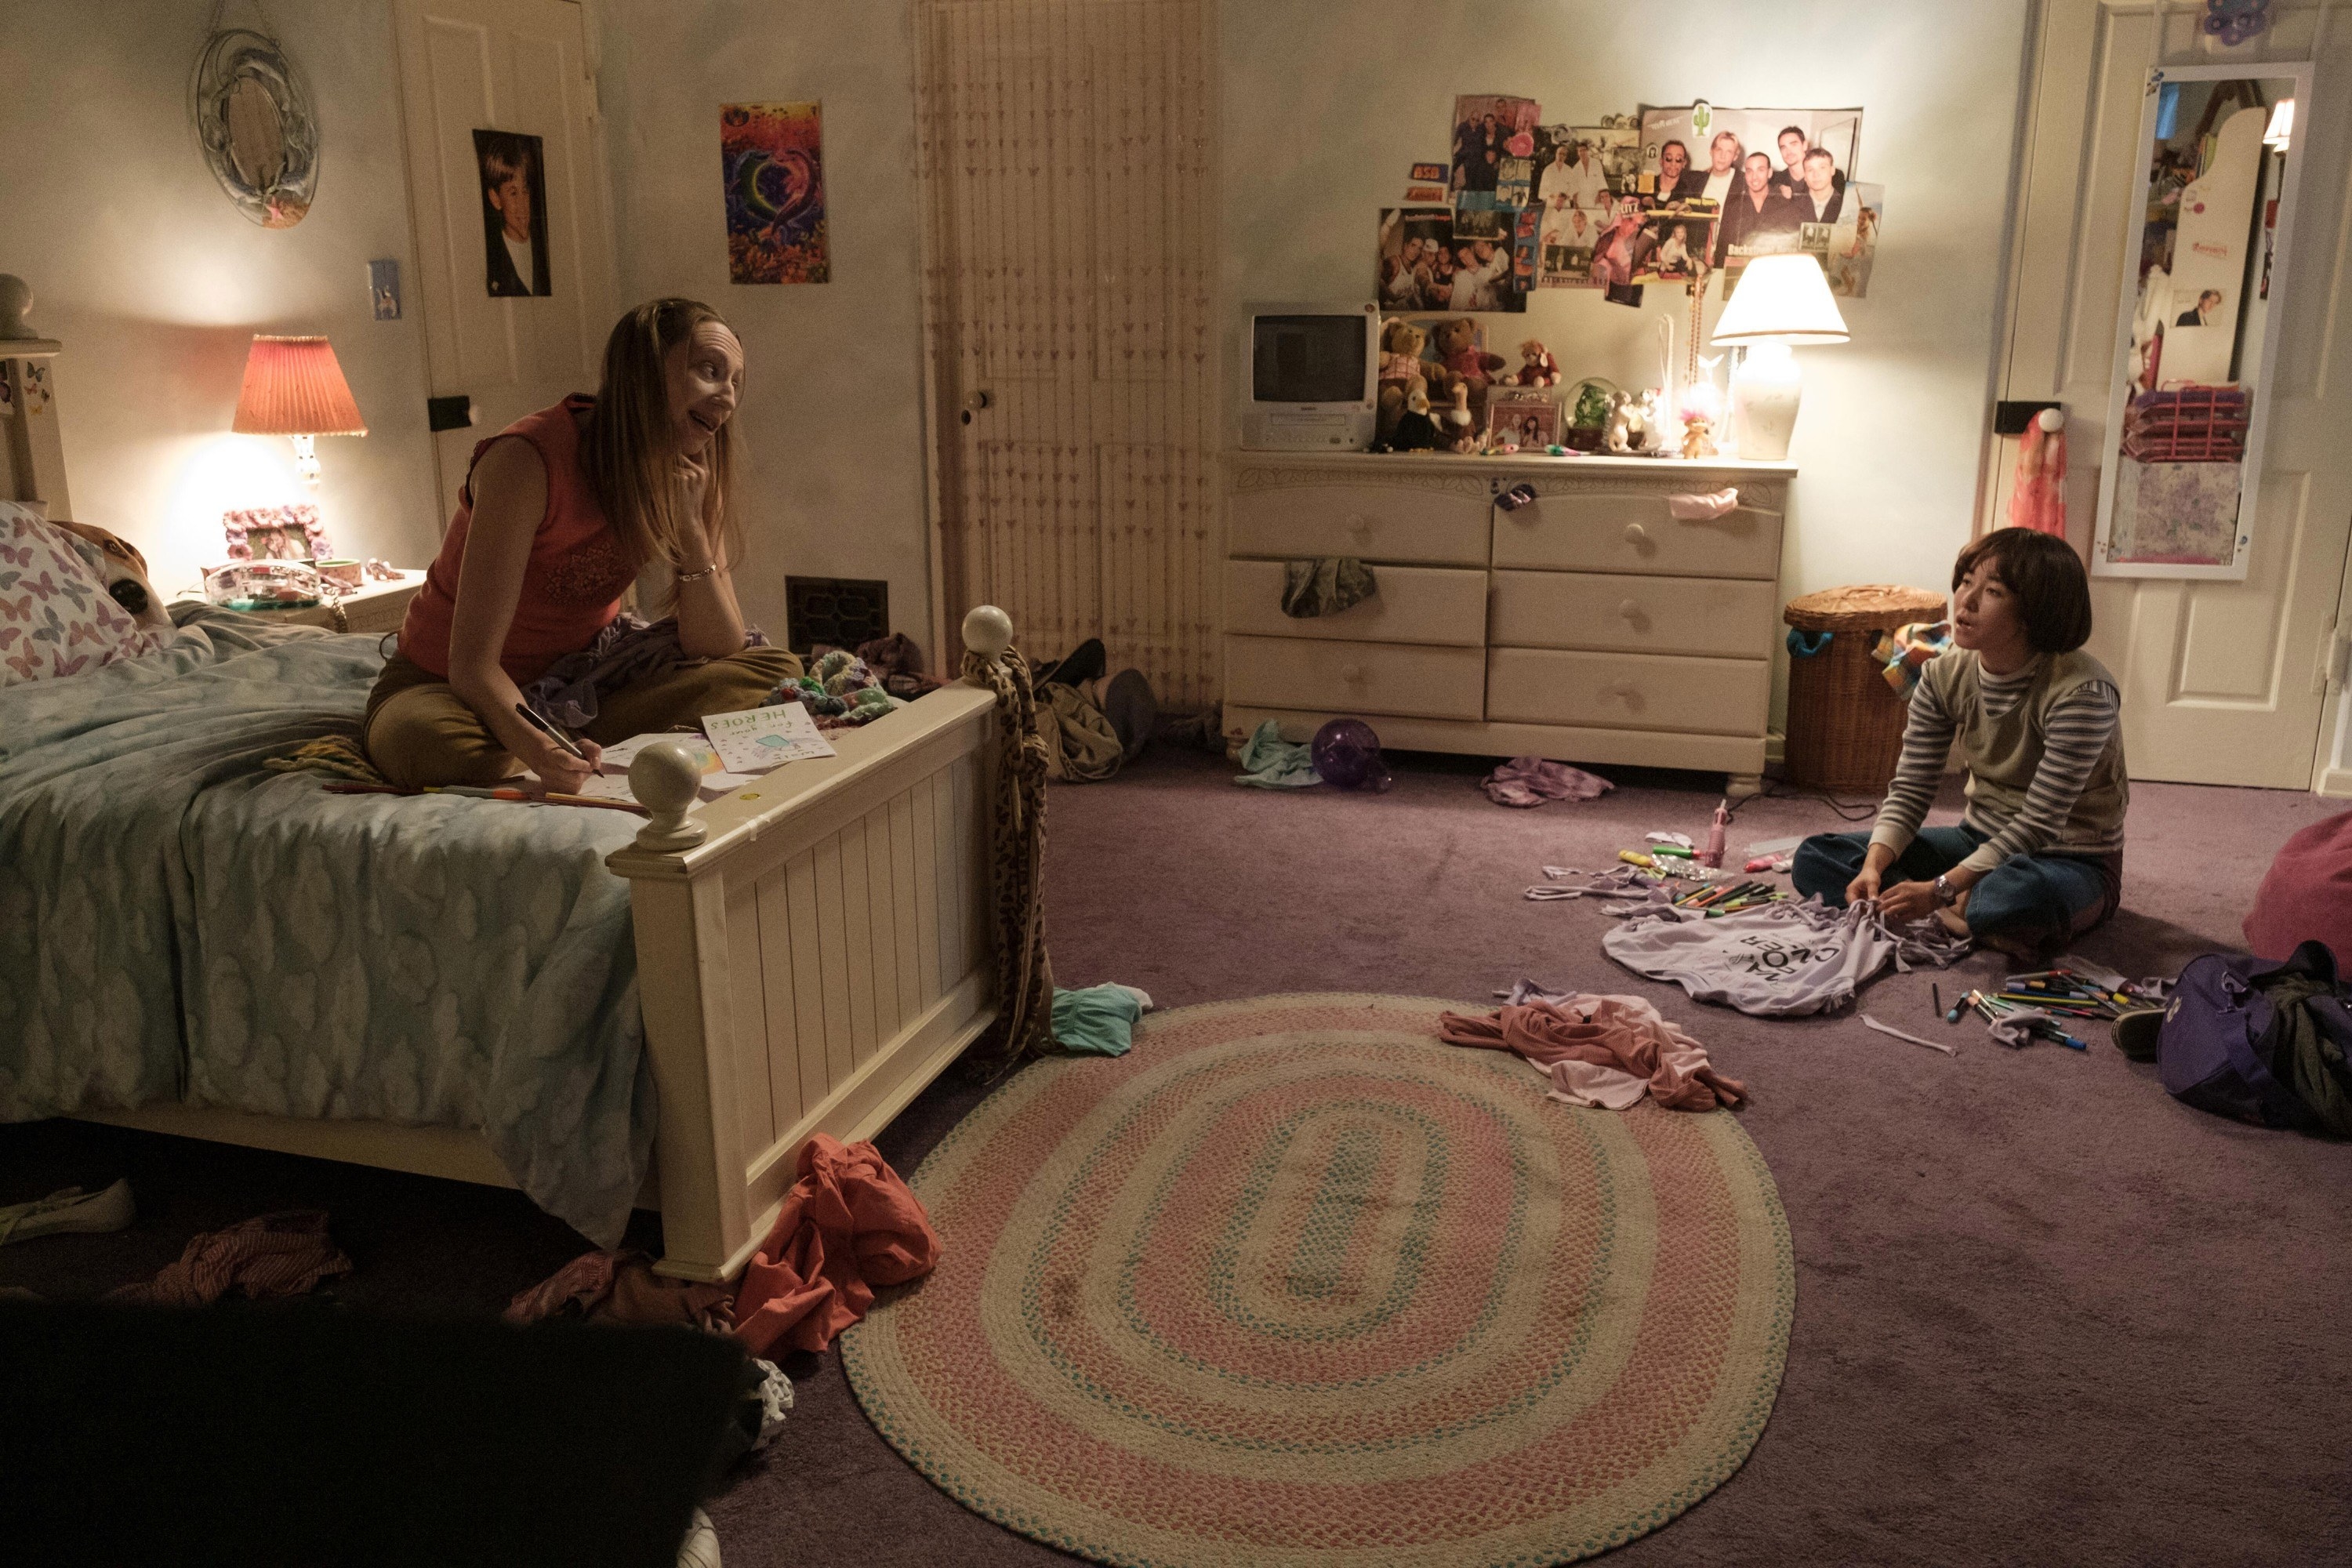 Anna taunts Maya from her bed while Maya protests from the floor